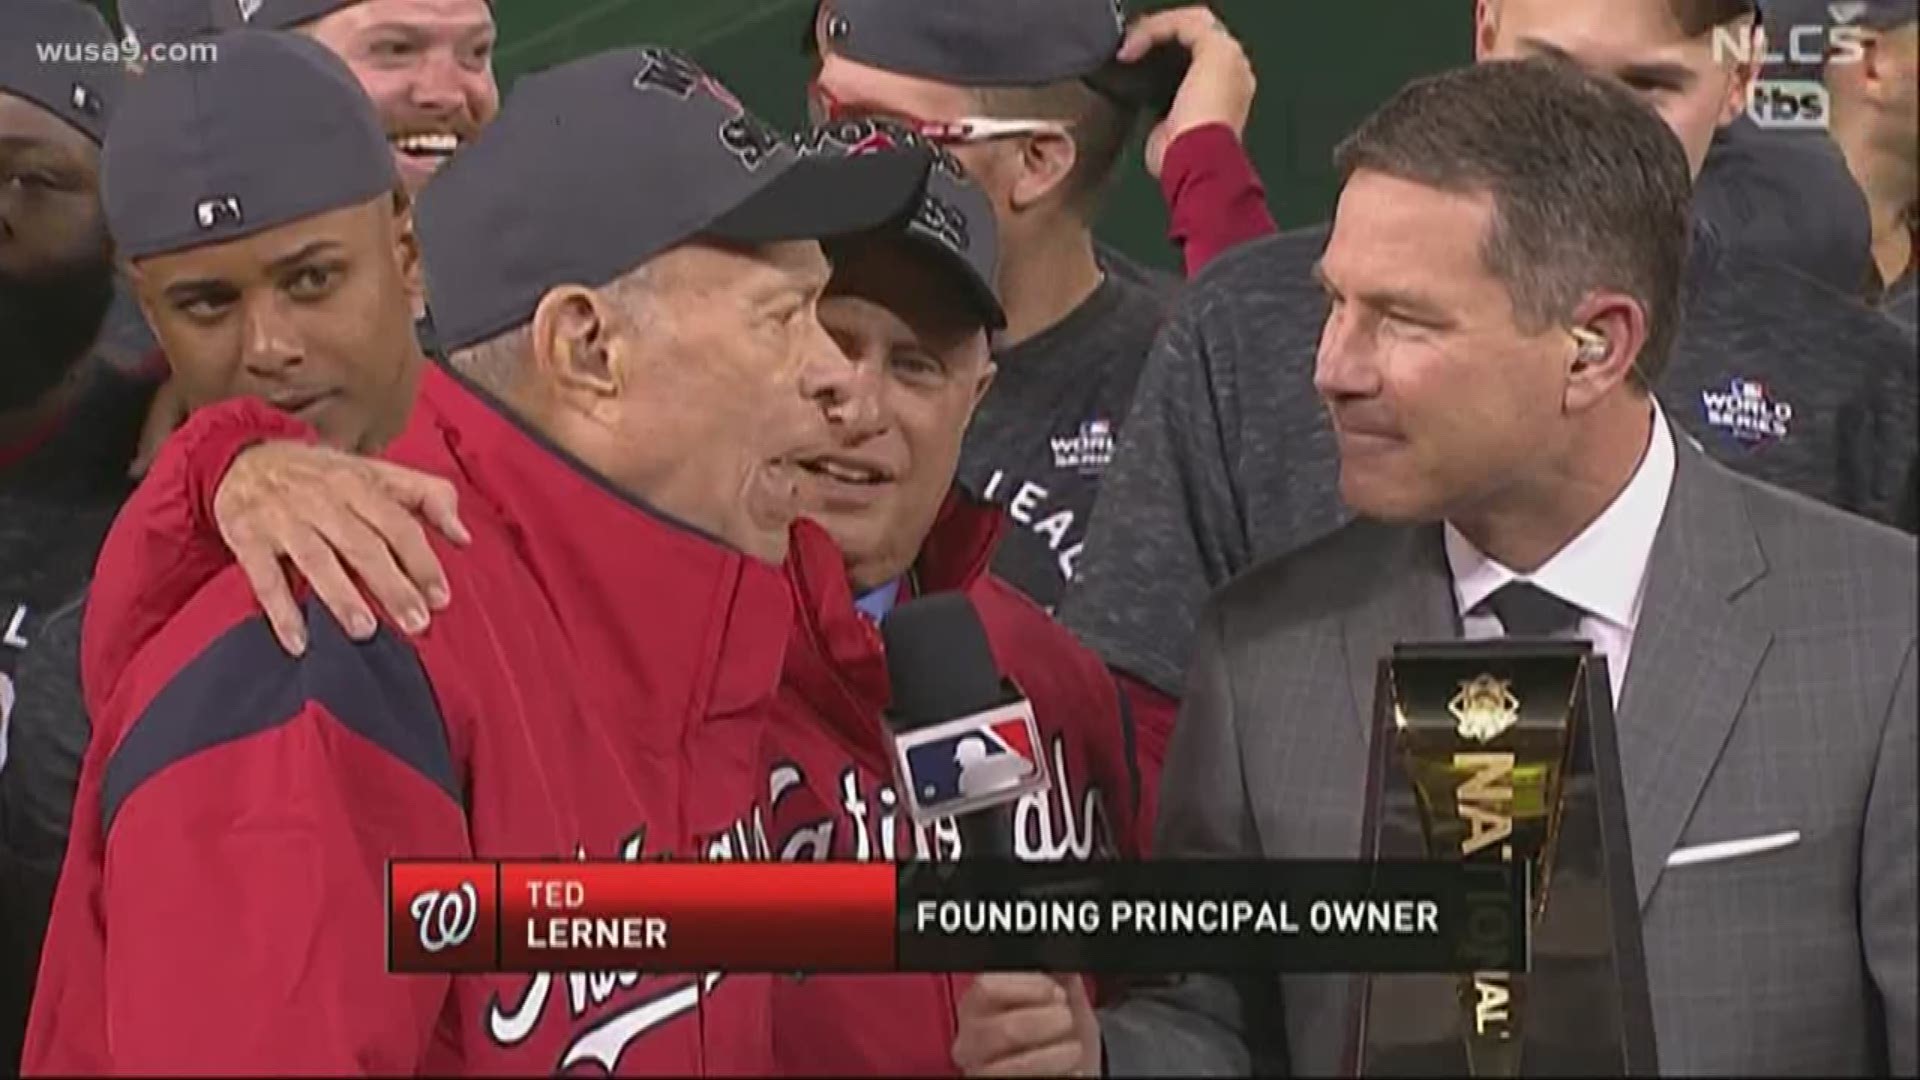 Ted Lerner, former owner of the Washington Nationals, turned 90 years old last night. His gift? The Nats winning the pennant.